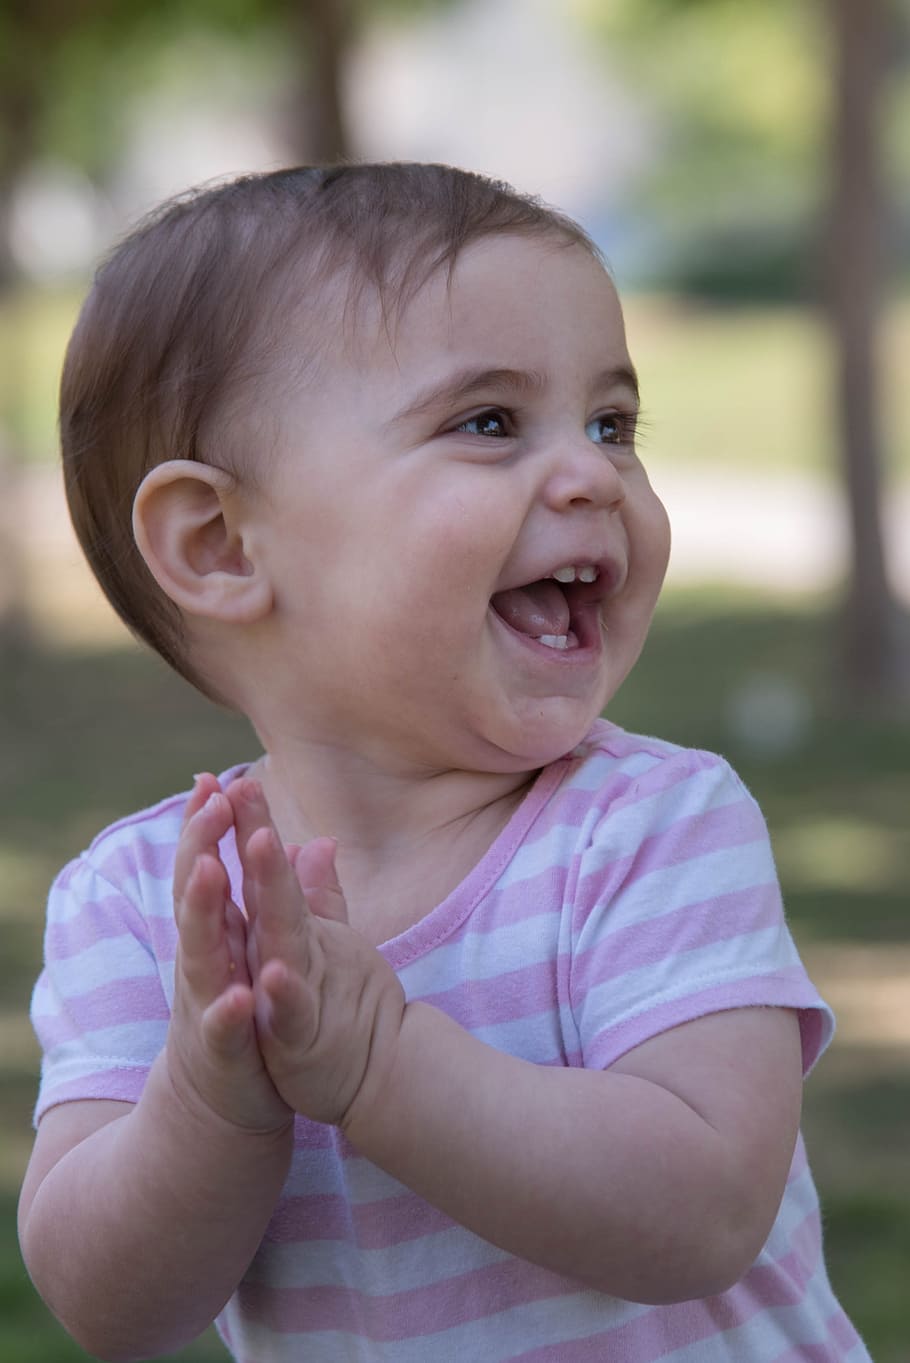 baby clapping hands, baby, happy, clap, smile, fun, cheerful, smiling, girl, infant